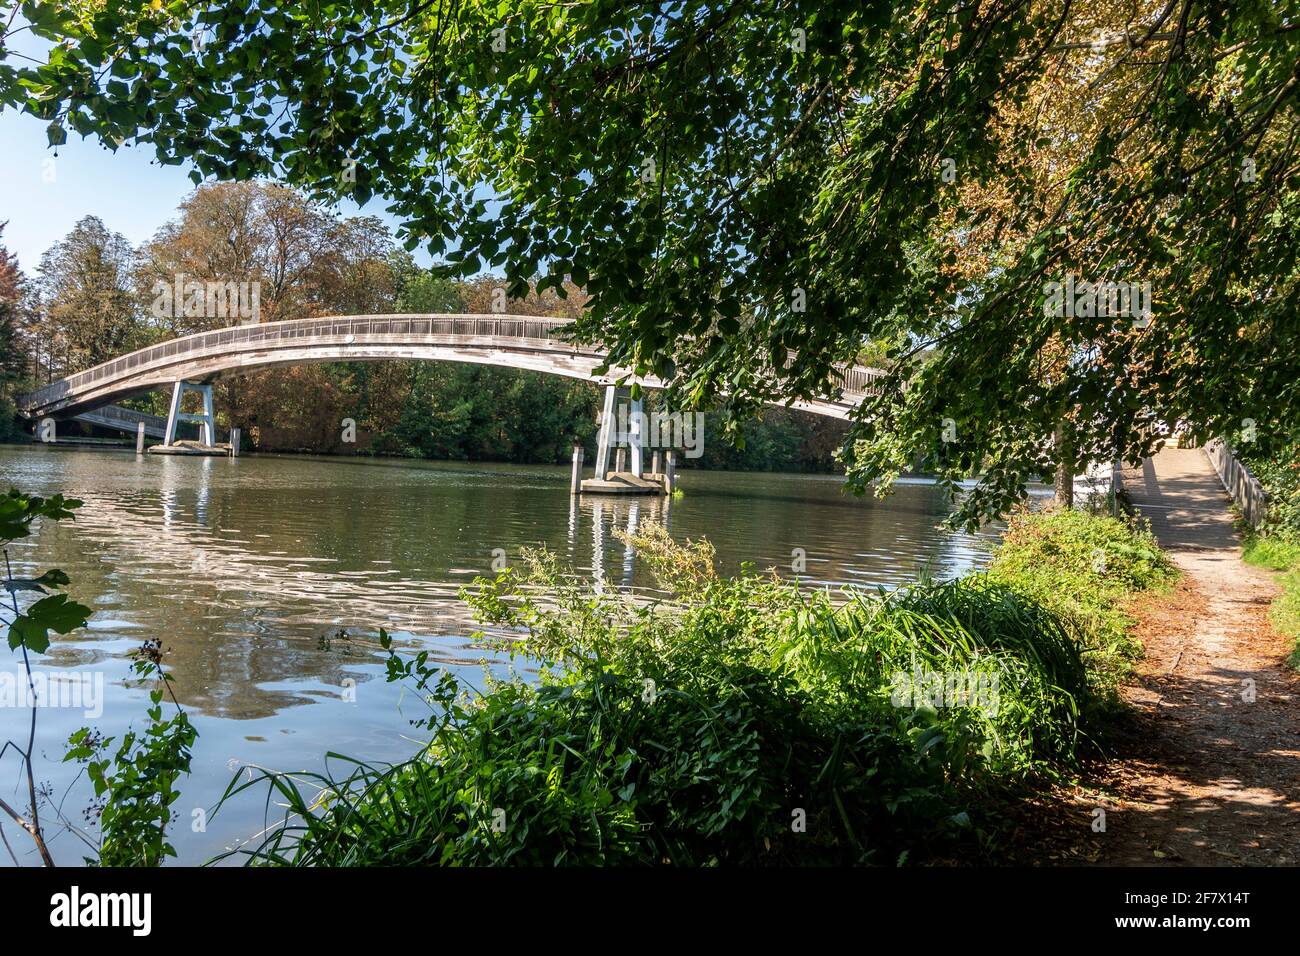 The wooden structure of the Temple footbridge at Temple Lock on the River Thames in Buckinghamshire, Britain.  It allows walkers a link to continue al Stock Photo